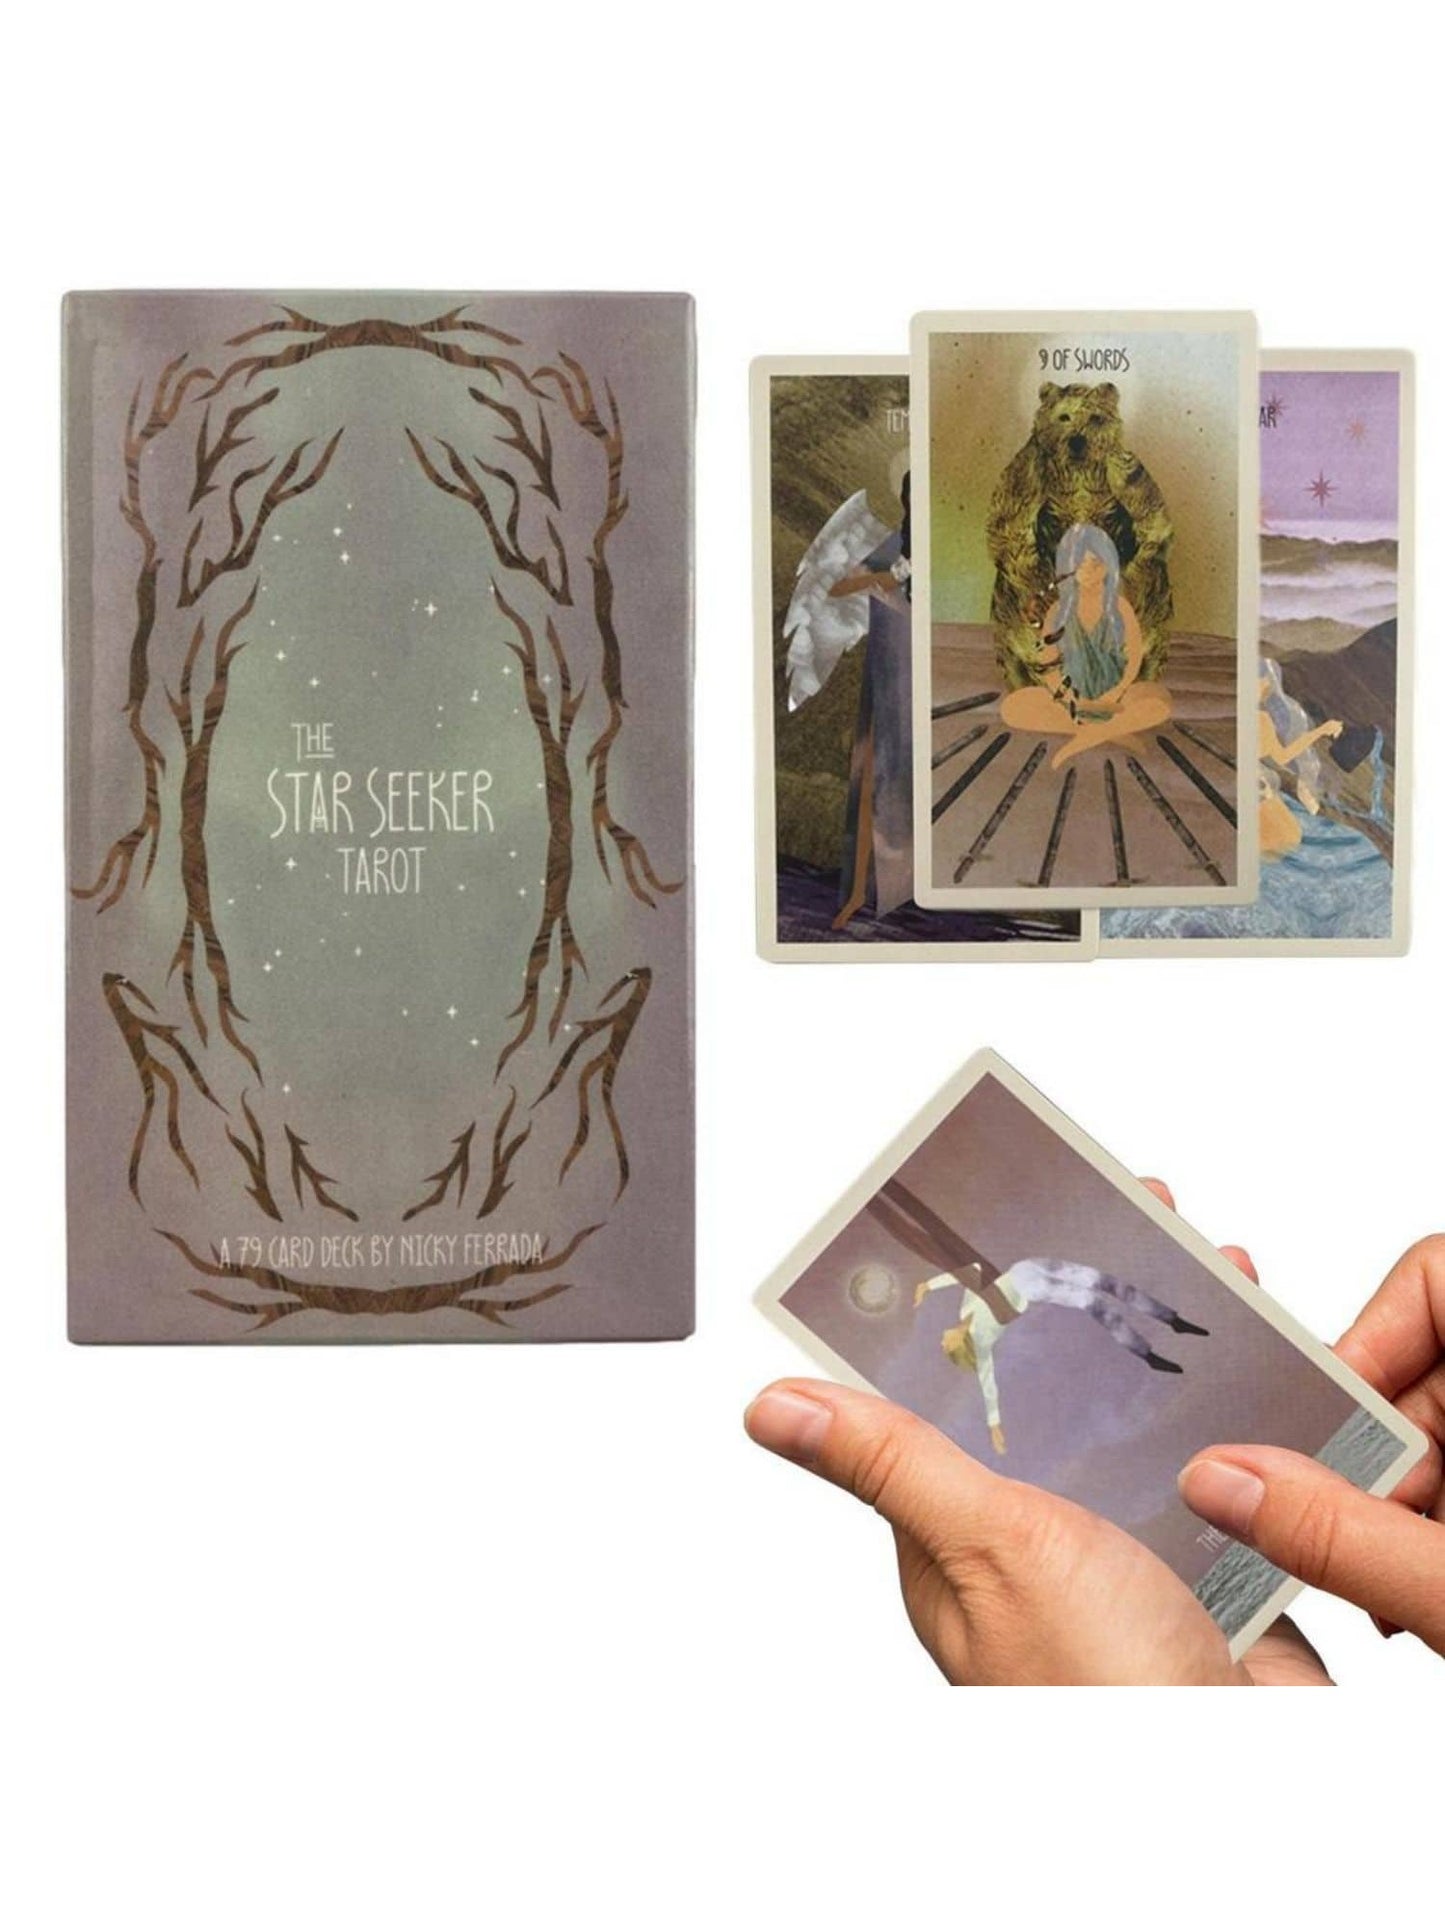 The Star Seeker Tarot Deck With Instructions. 79 cards 12x7cm